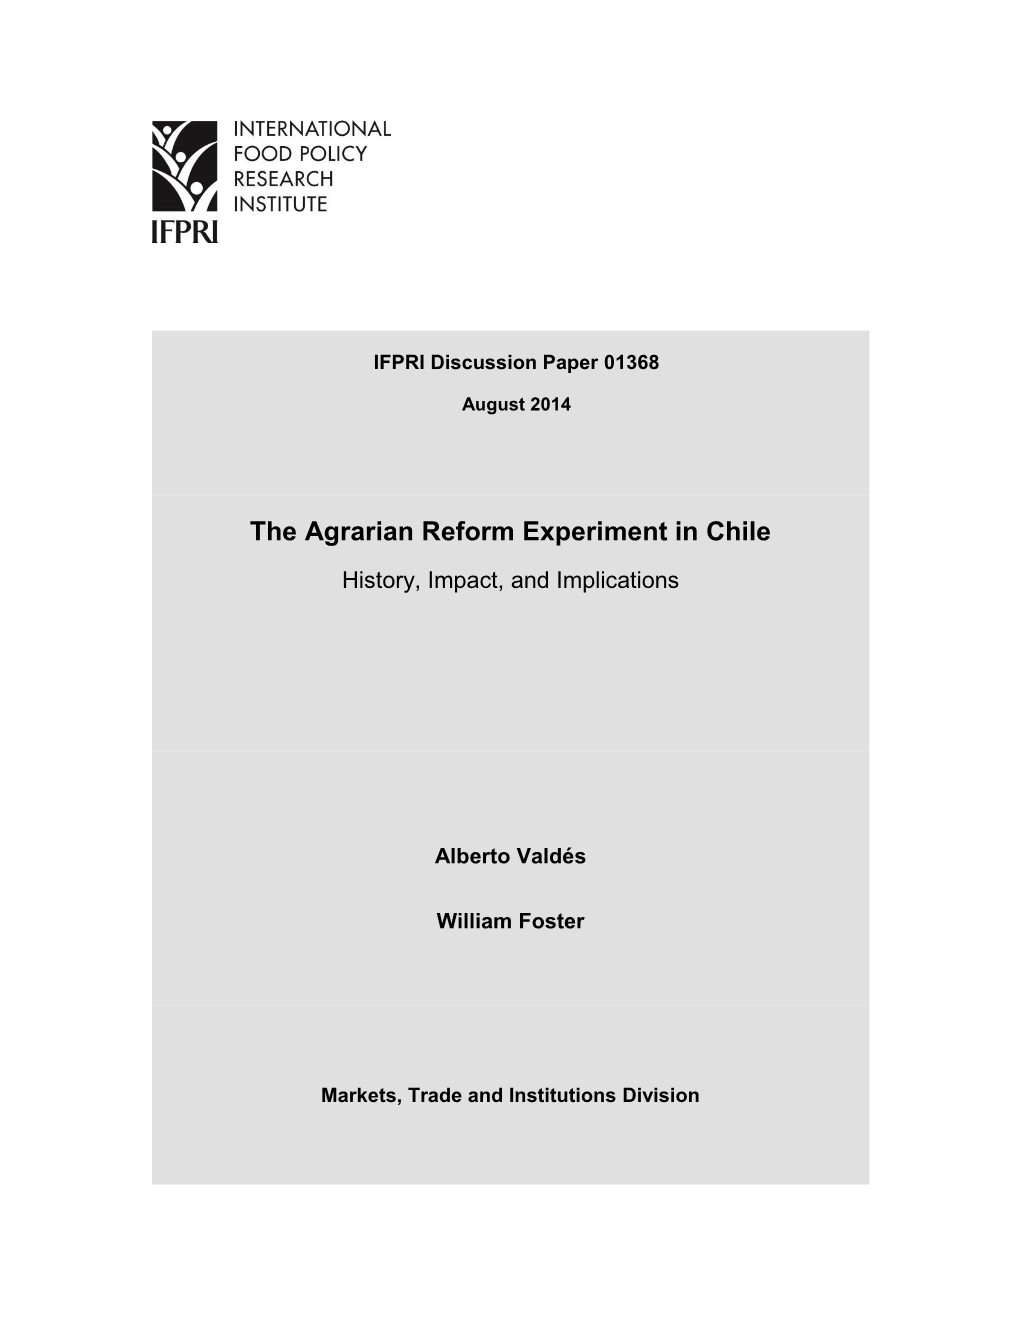 The Agrarian Reform Experiment in Chile